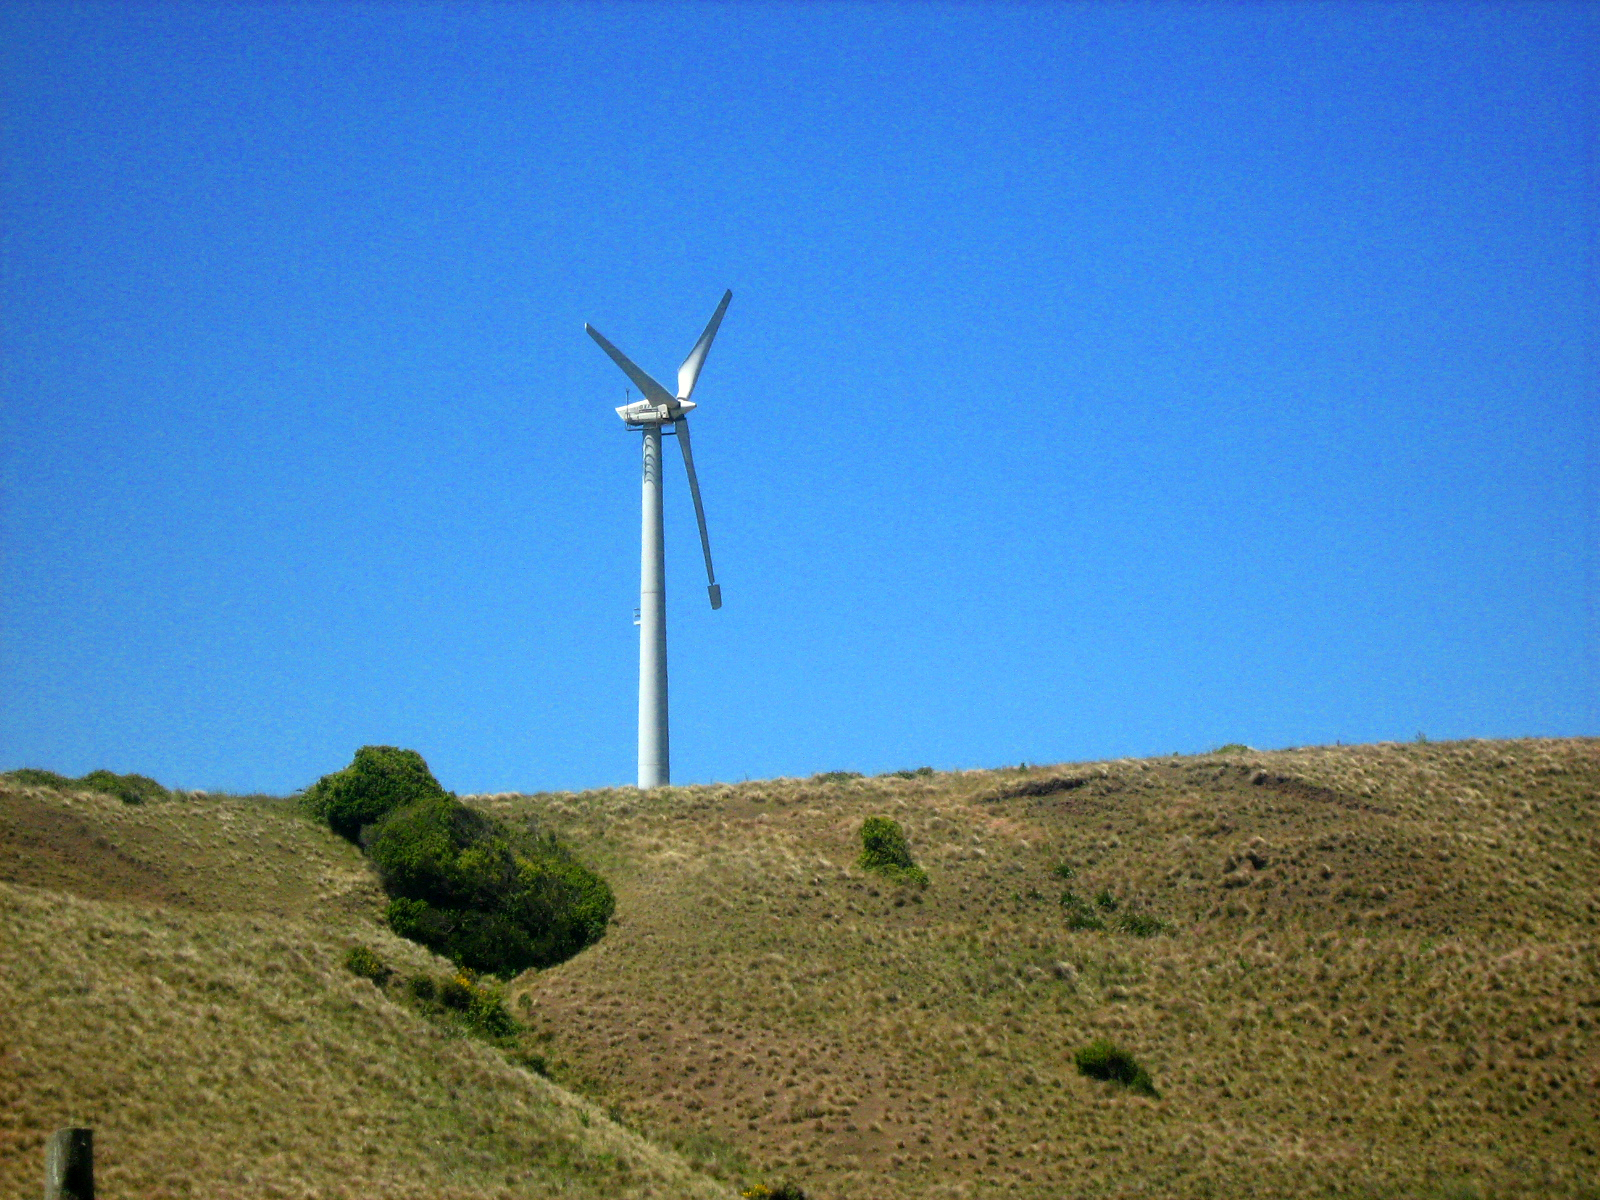 a single windmill stands on top of a hillside